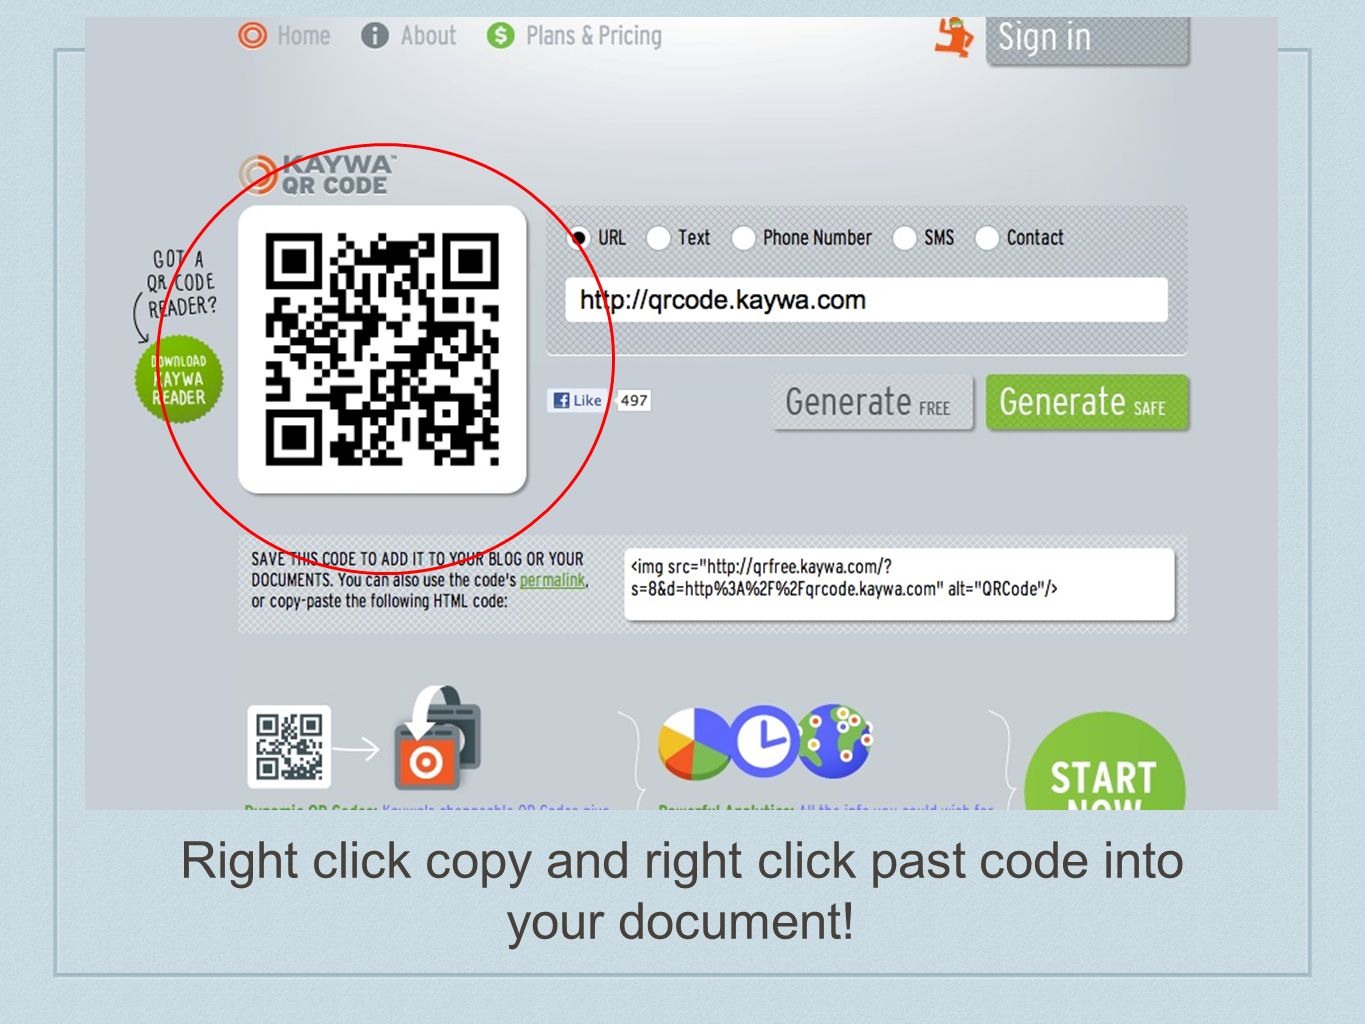 Right click copy and right click past code into your document!